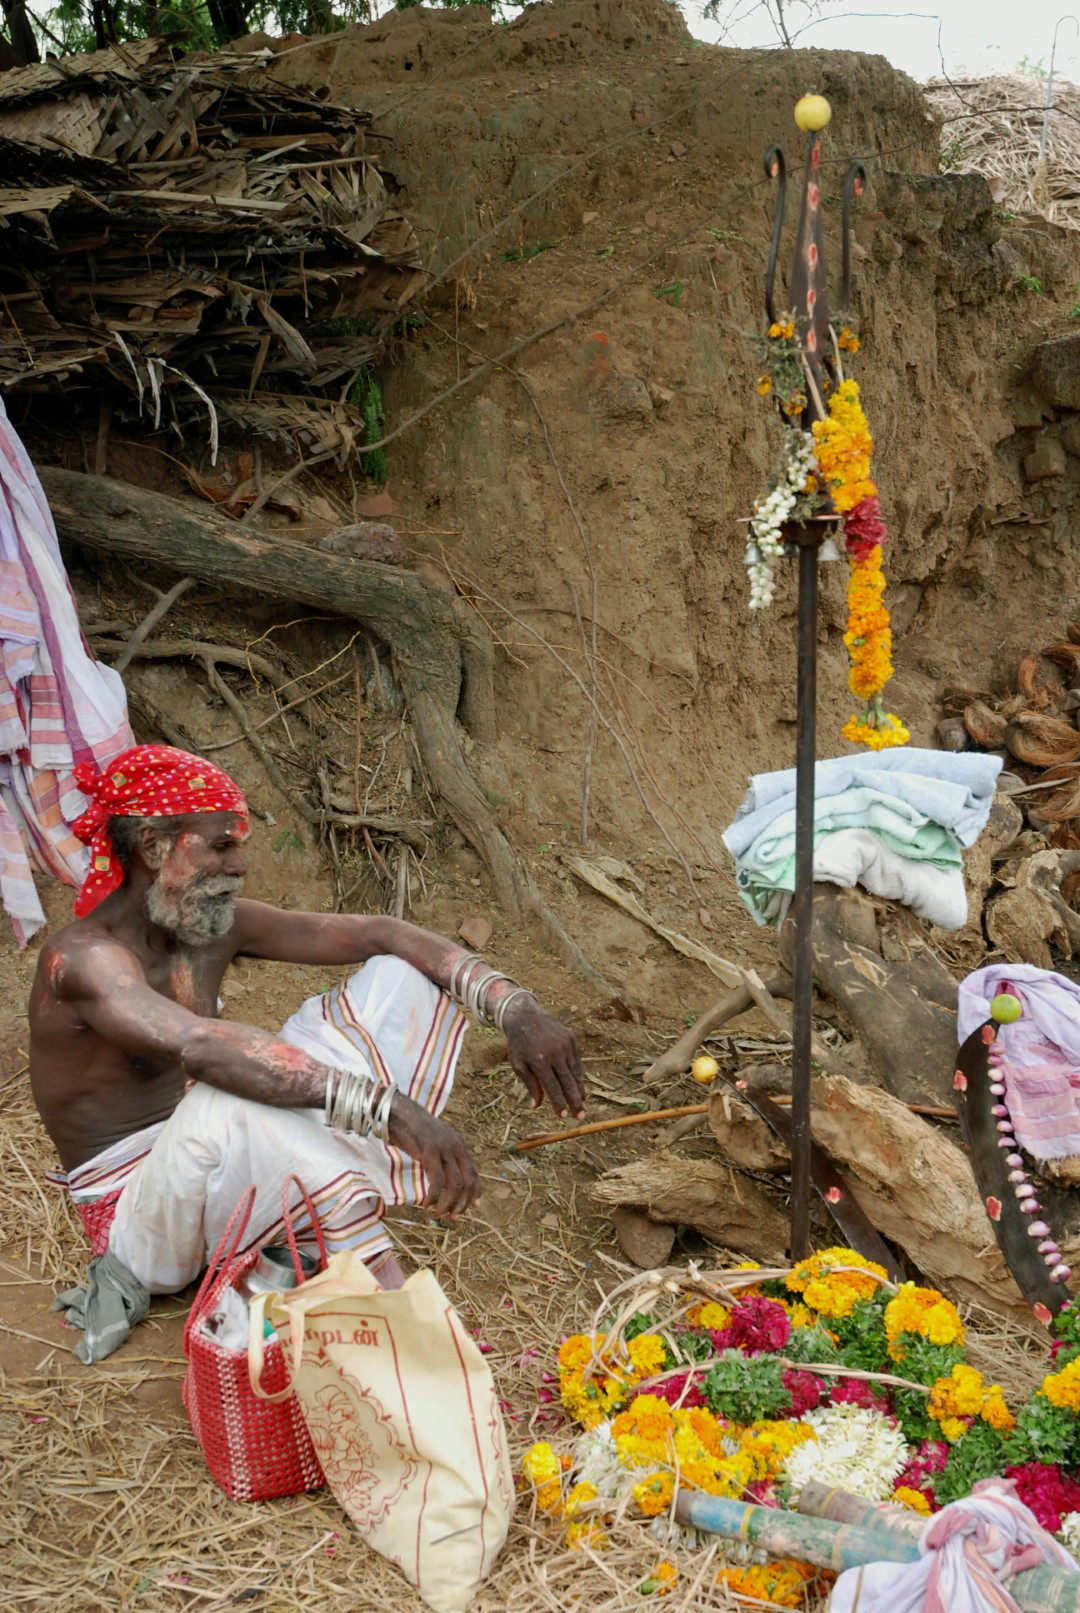 <span style="font-weight:normal;">A <i>sami-adi</i> waiting for the rituals to begin, sits next to a sacred trident and flower garlands. The silver bracelets he is wearing are traditional and common elements of his station.</span>